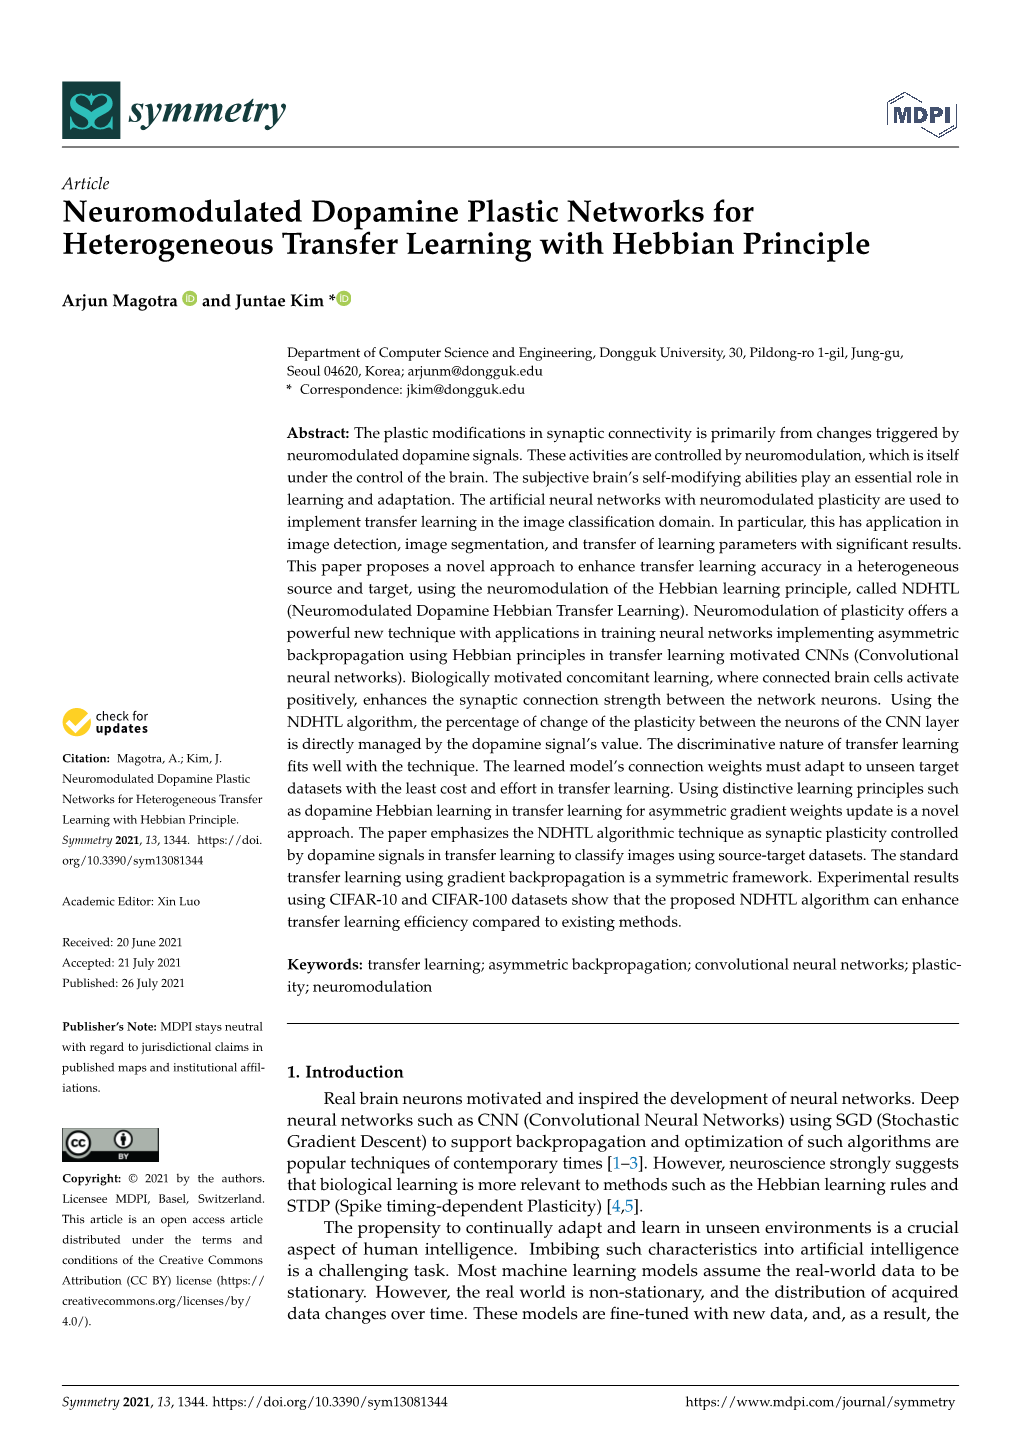 Neuromodulated Dopamine Plastic Networks for Heterogeneous Transfer Learning with Hebbian Principle